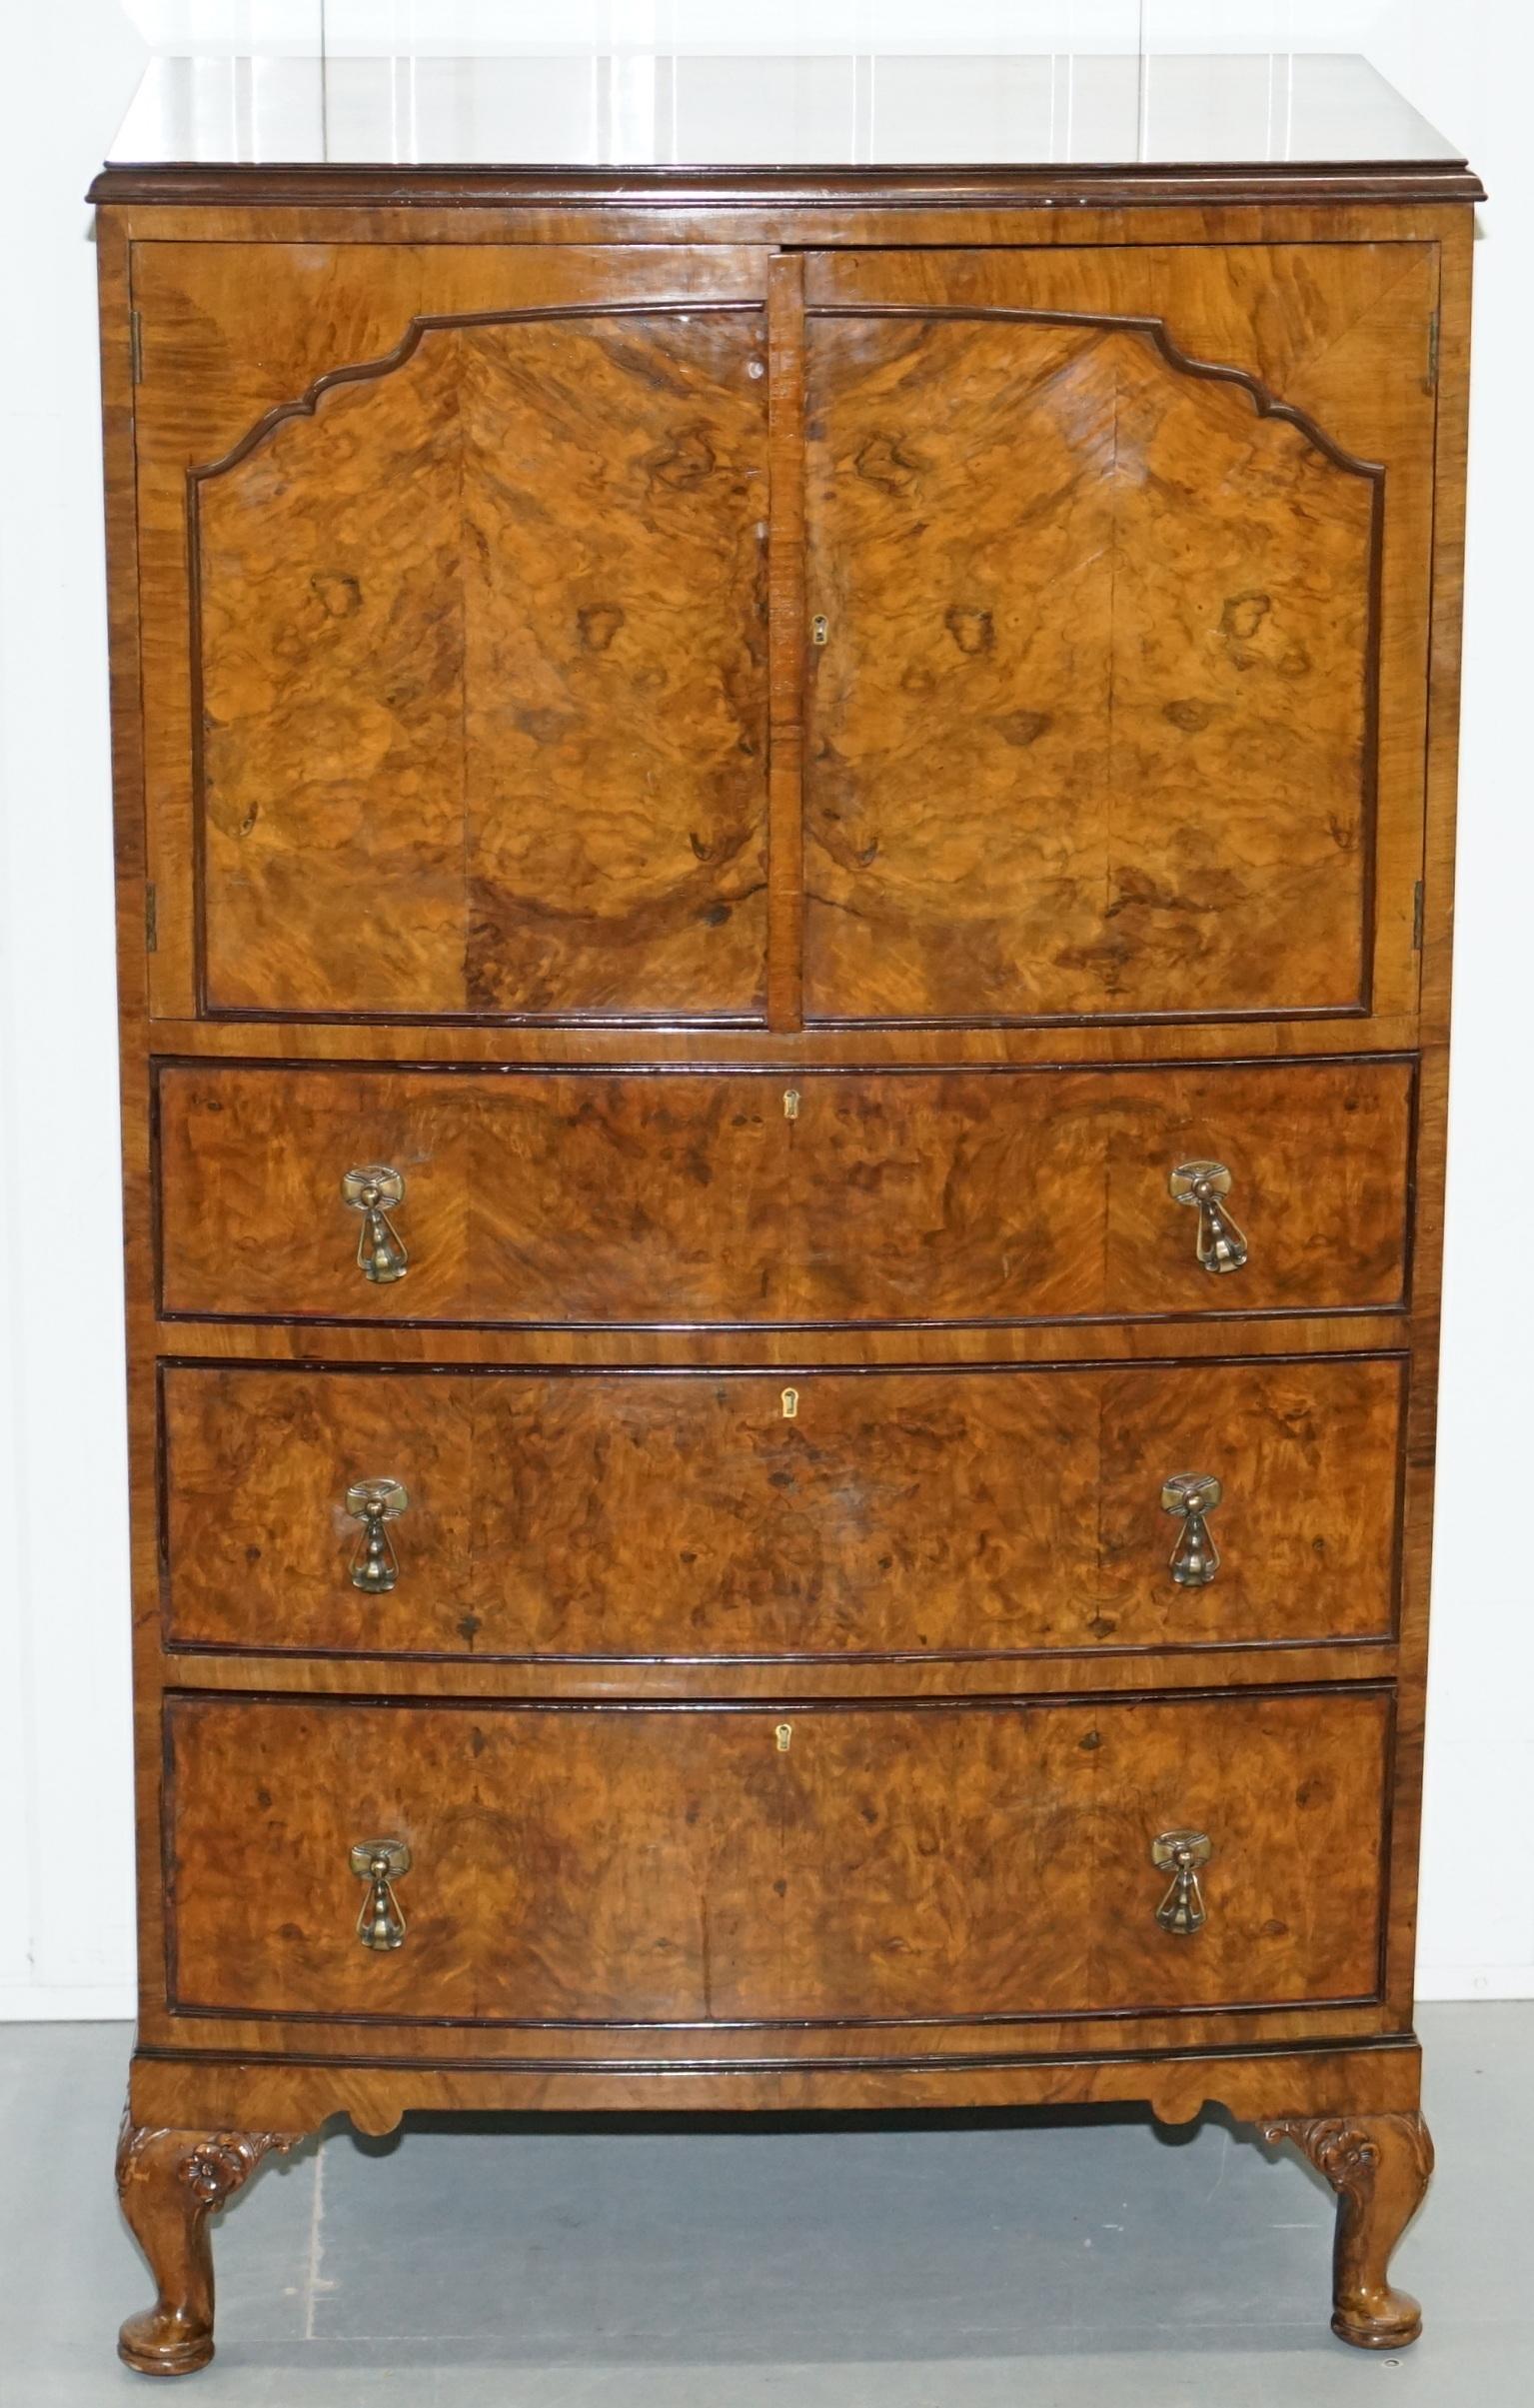 We are delighted to offer for sale this stunning Art Deco burr walnut cupboard with very good looking hand-carved legs

This is a very versatile handpiece of furniture, originally suited for dining room odds and sods, having drawers its one of